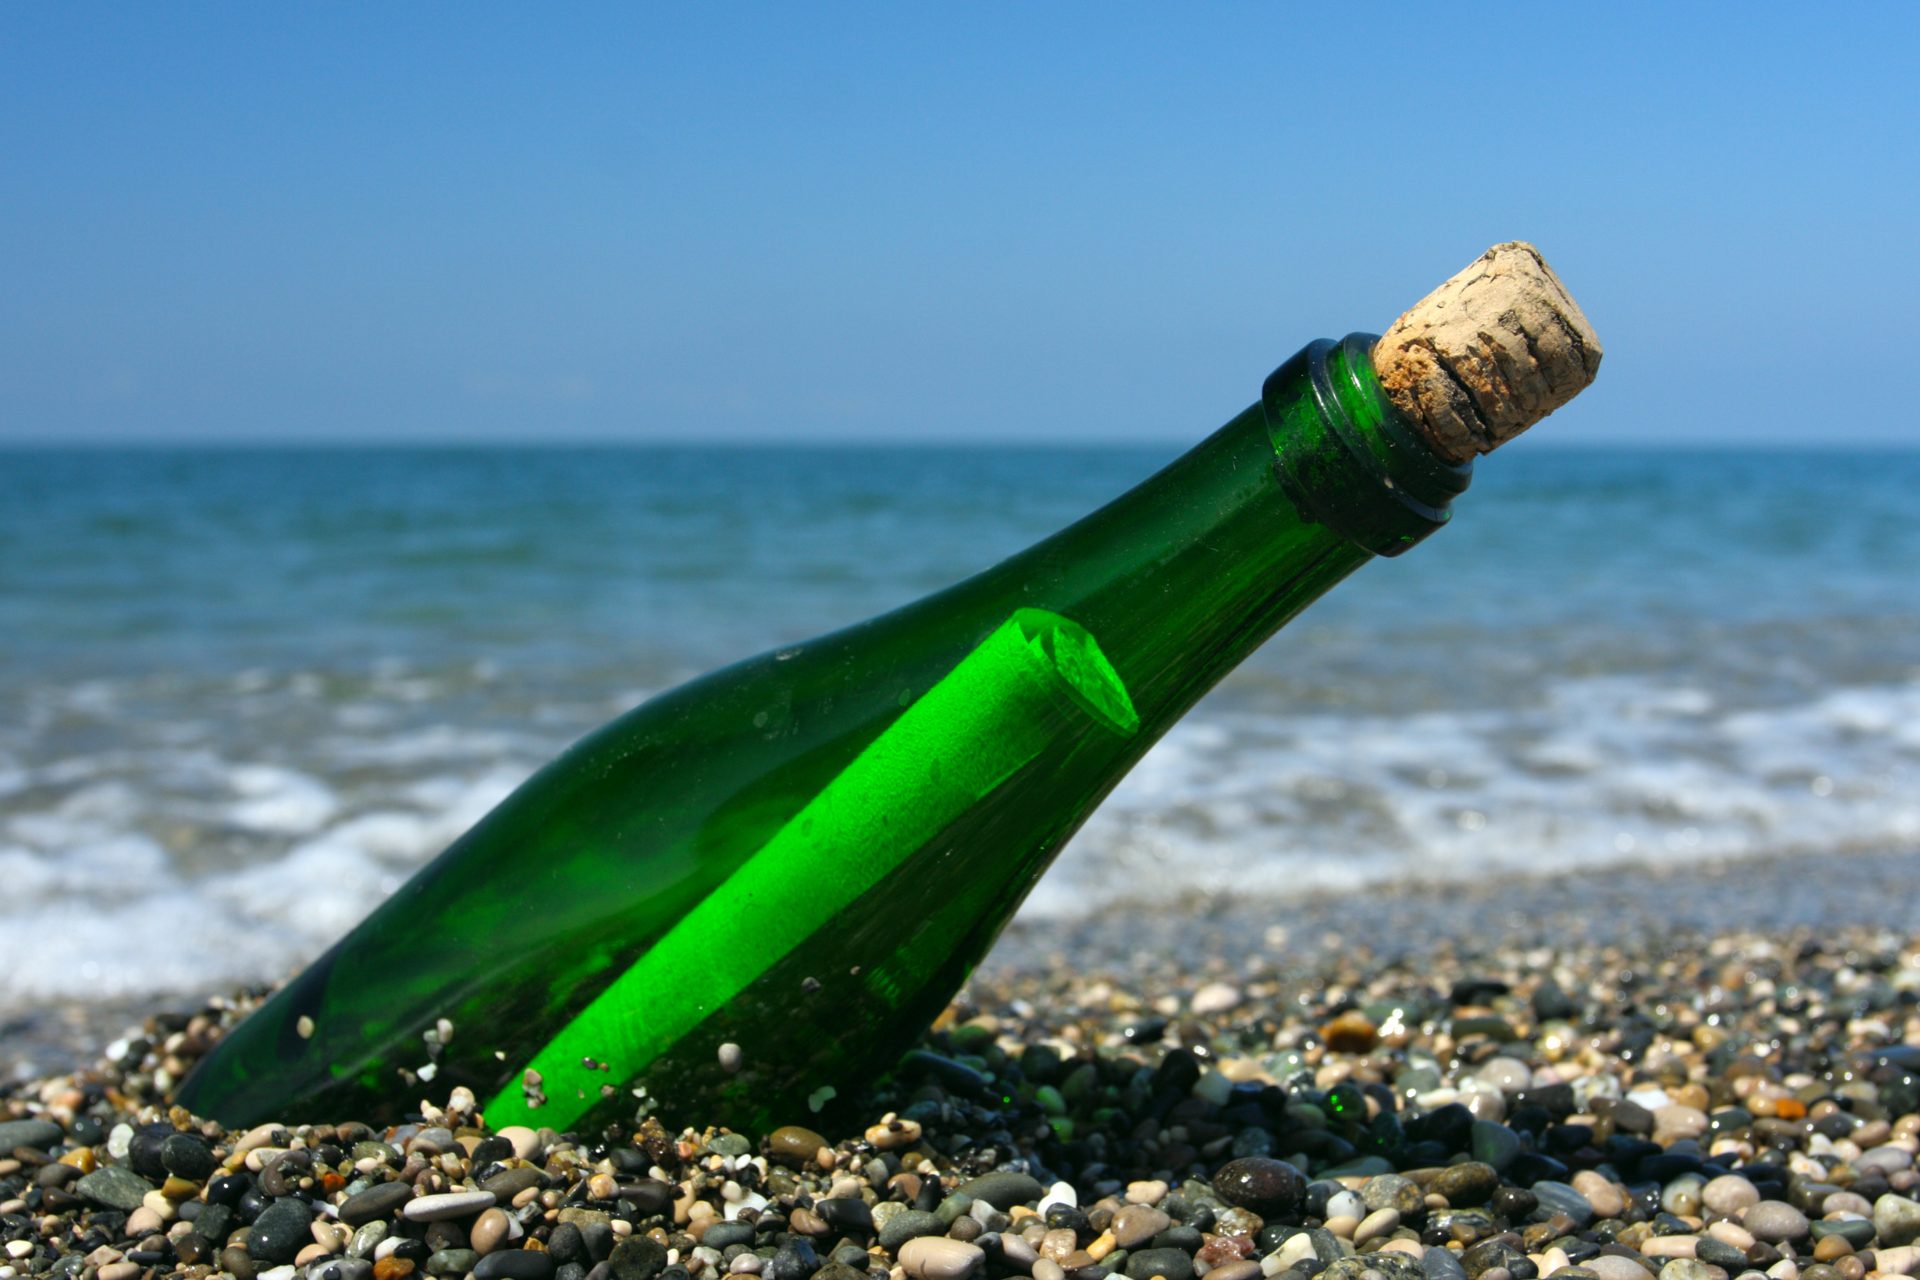 A photograph of a rolled up piece of paper in side a green bottle, half buried in pebbles on a rocky beach.